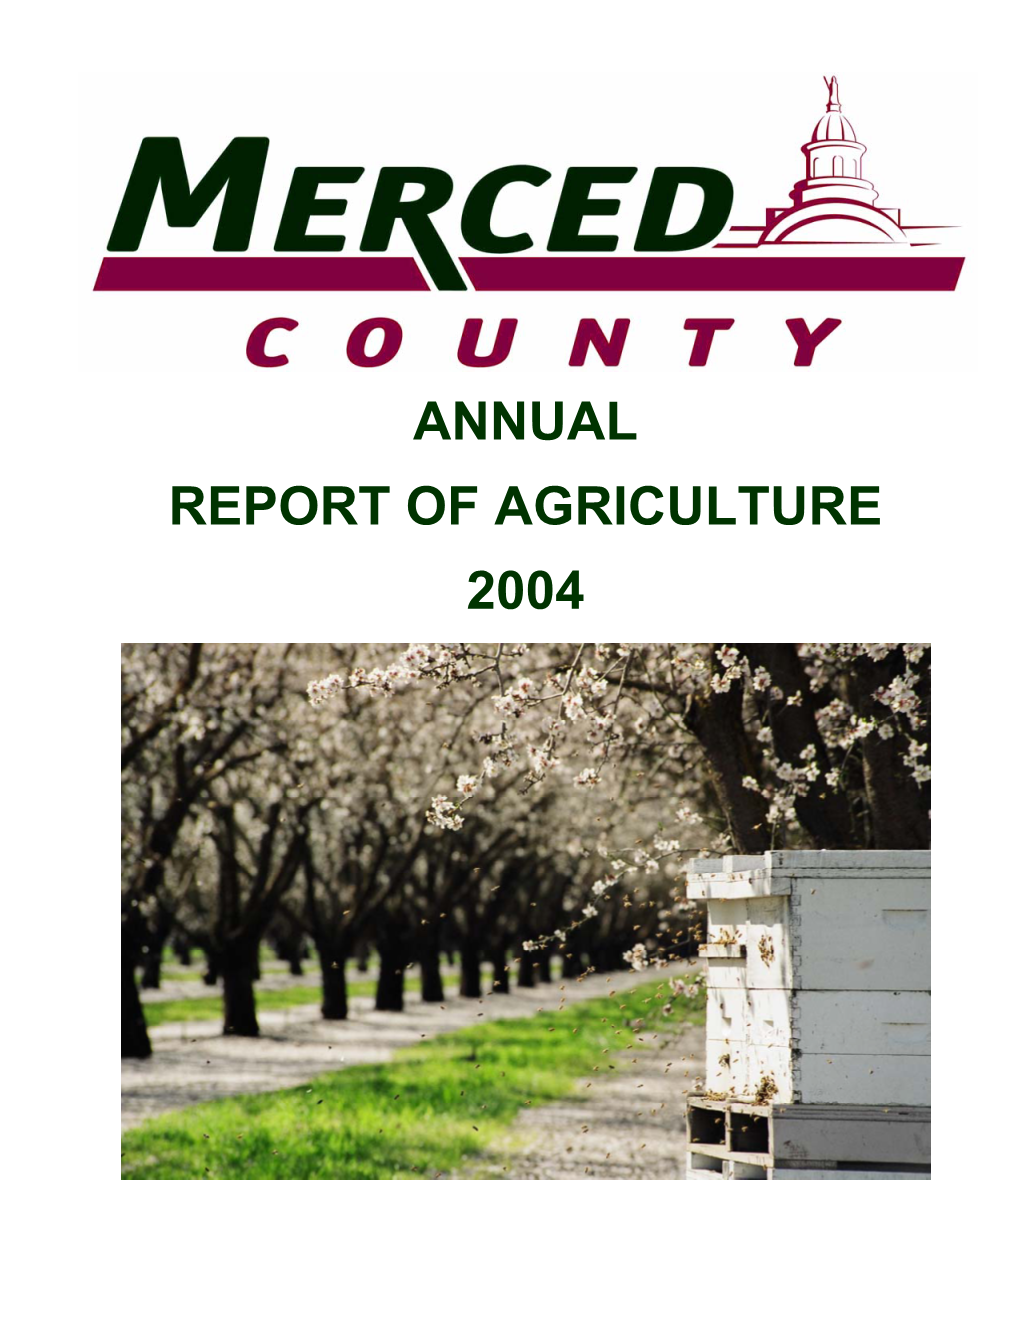 Annual Report of Agriculture 2004